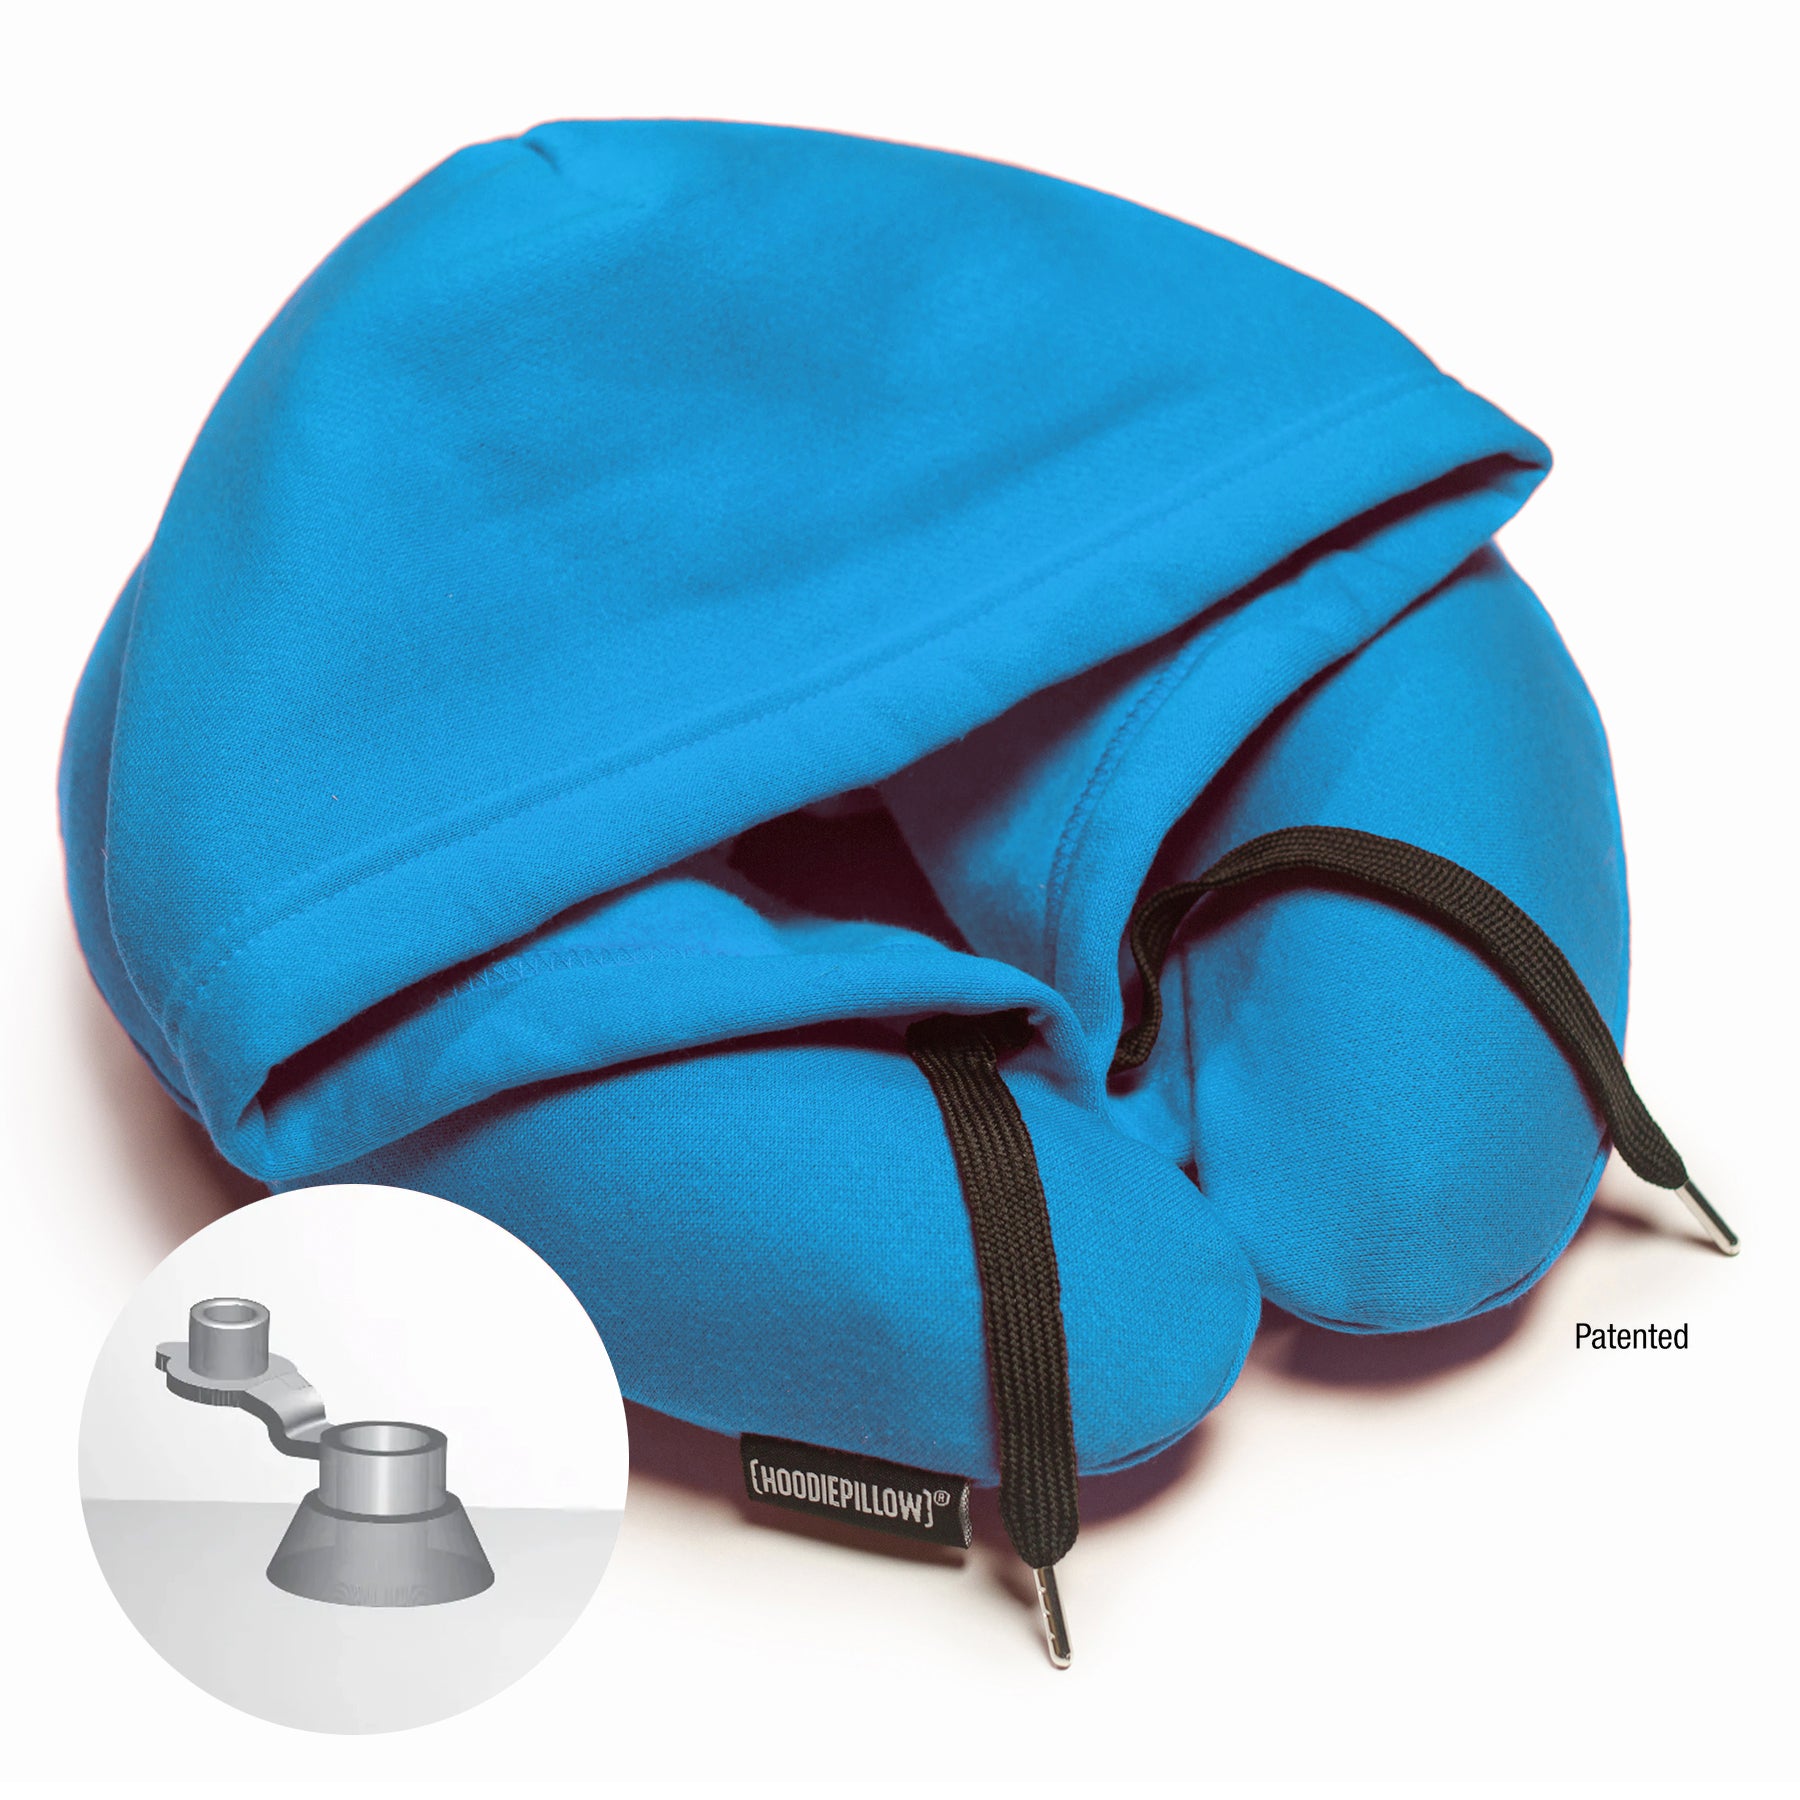 inflatable travel hoodie pillow